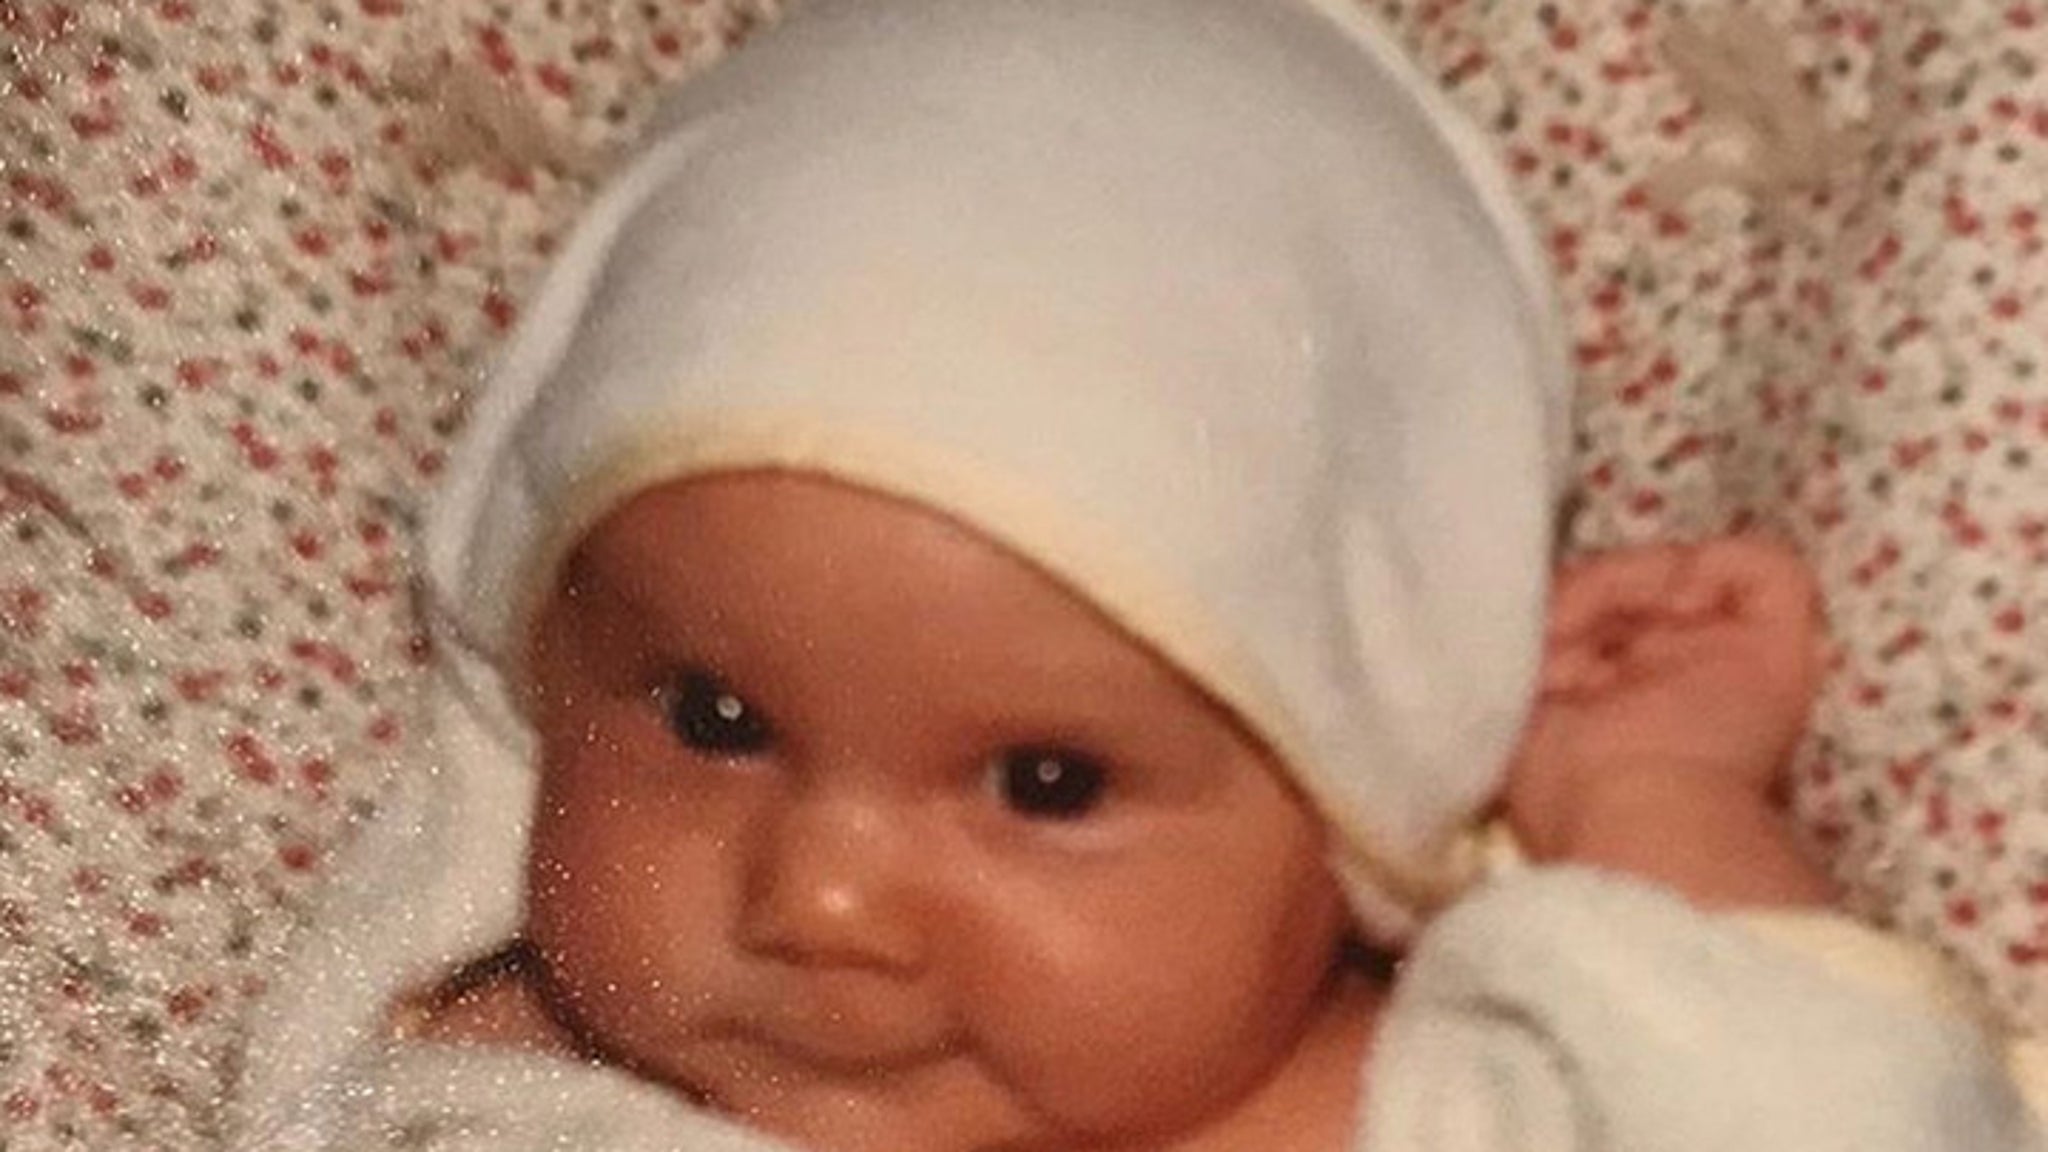 Guess Who This Adorable Baby Turned Into!